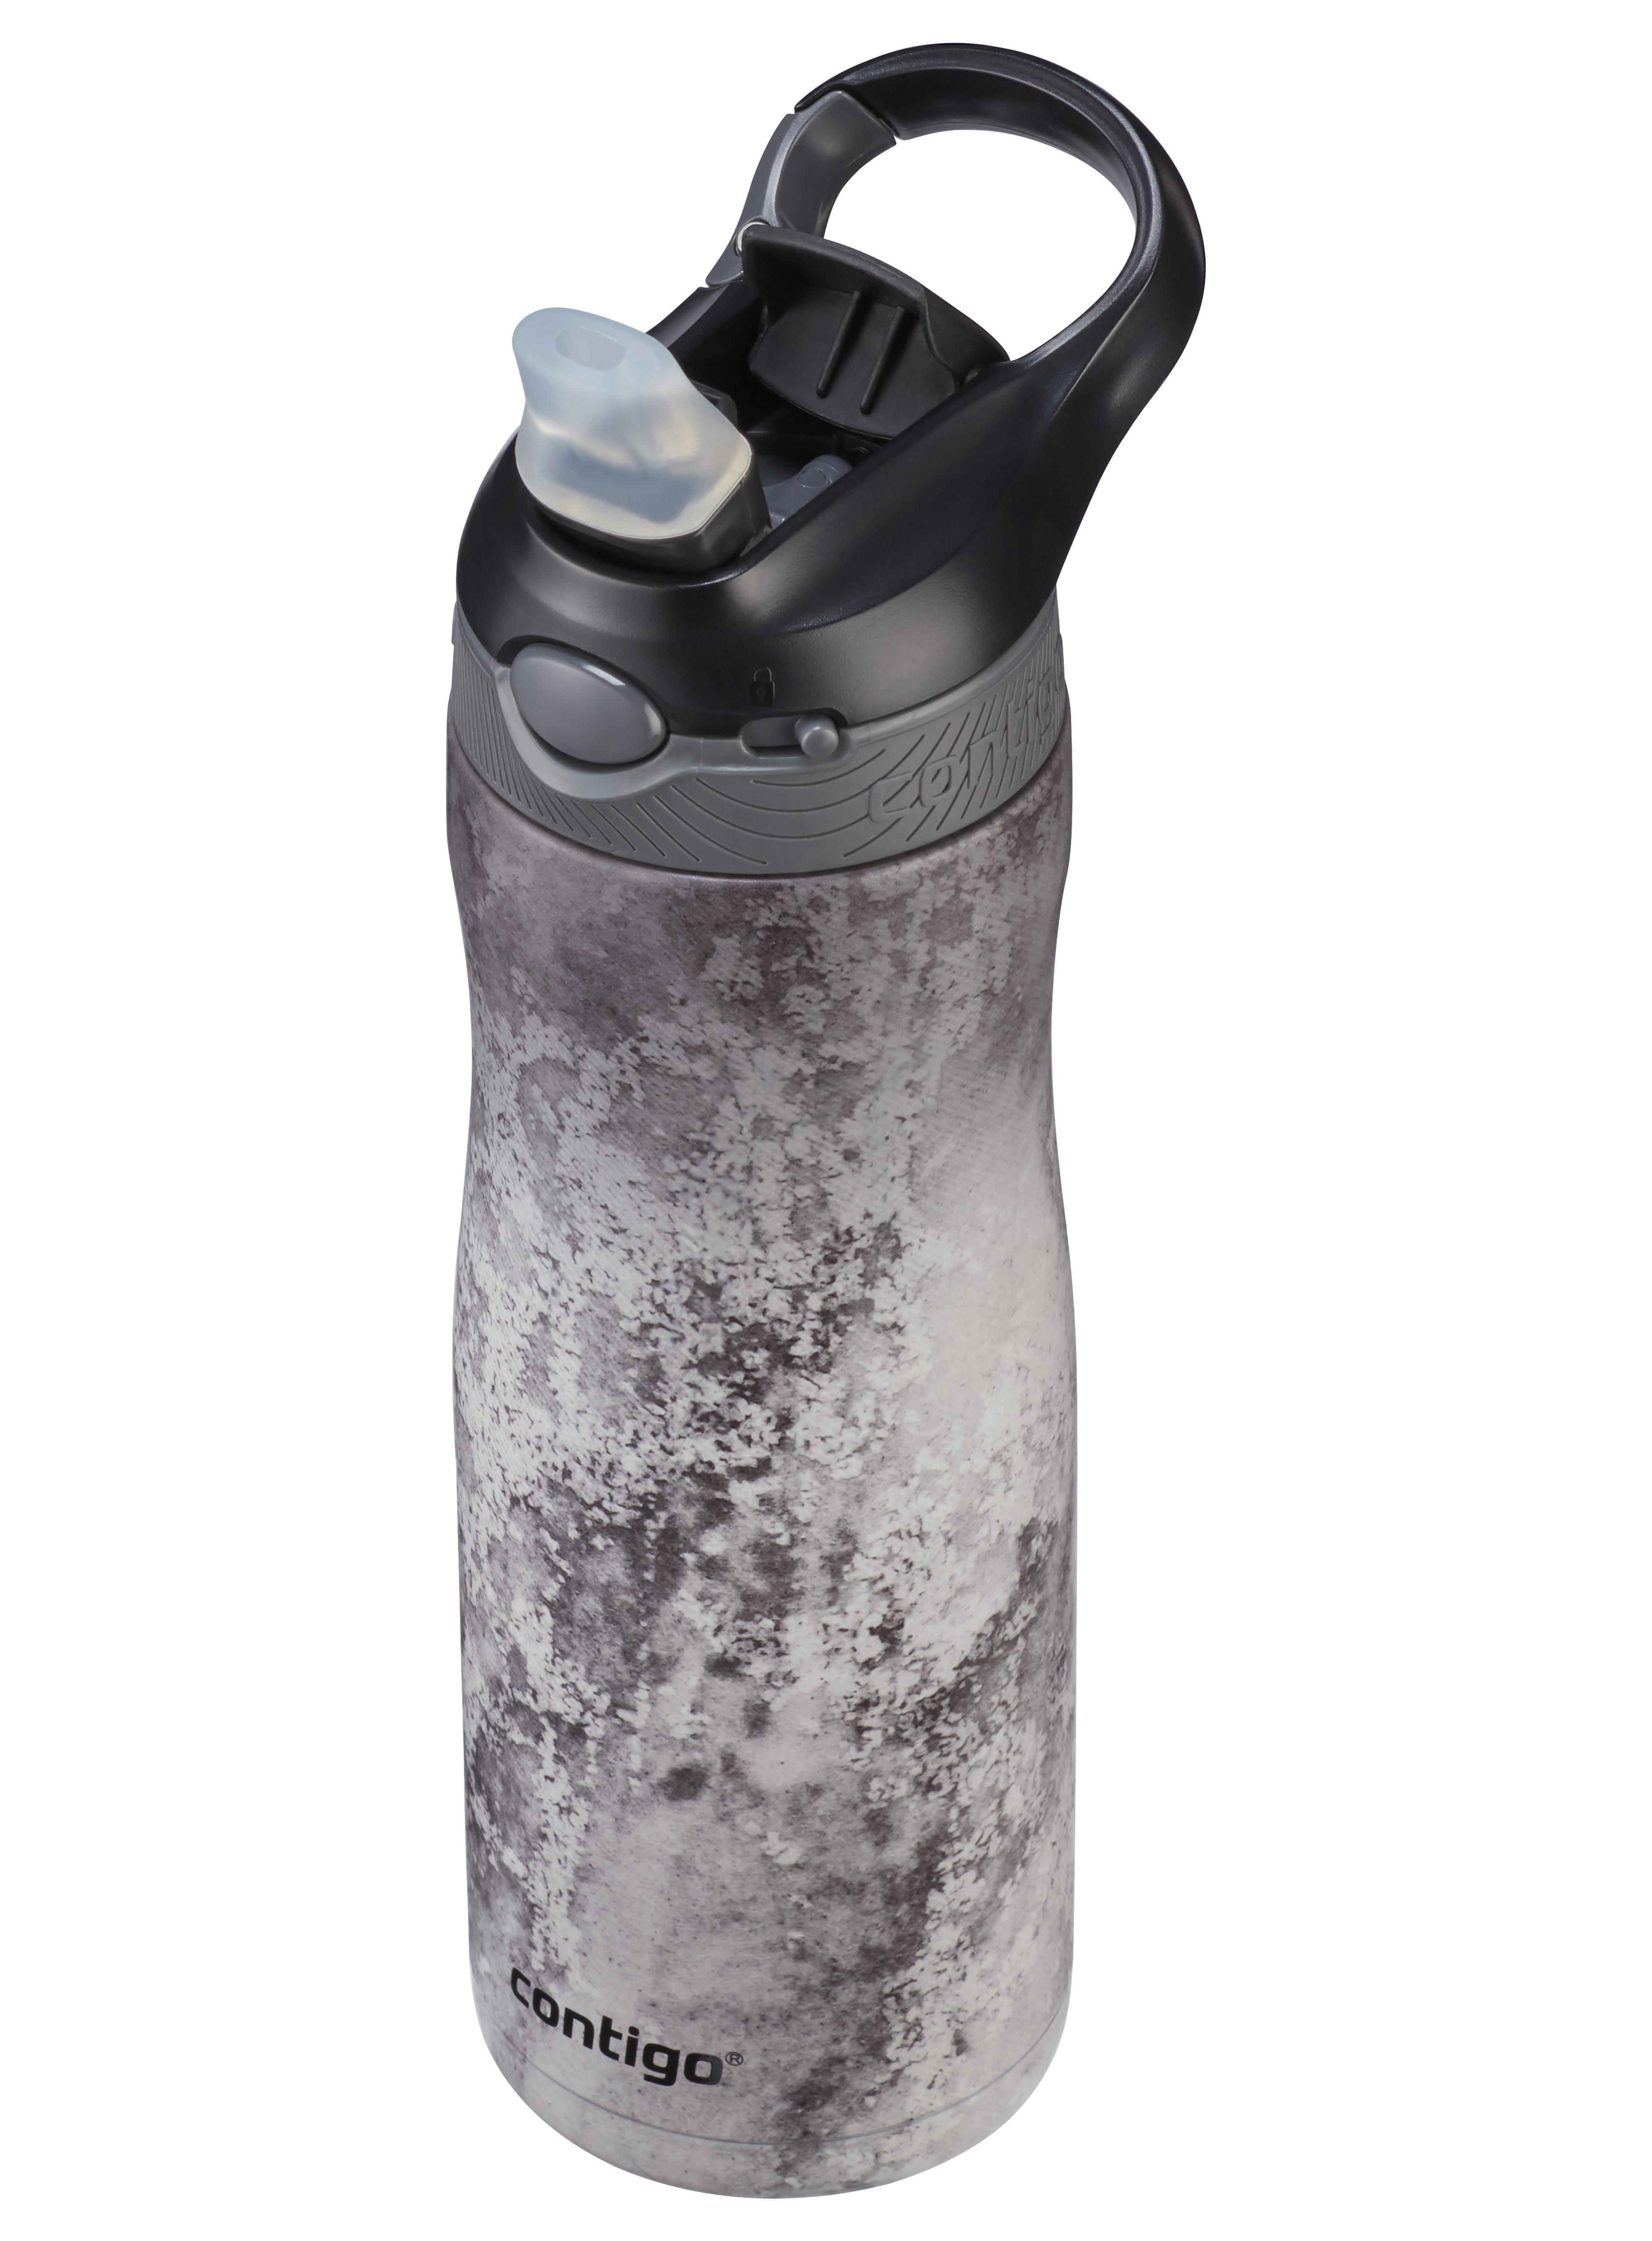 Contigo Wells Chill Stainless Steel Filter Water Bottle with Leak-Proof  Straw Lid and Replacement Fi…See more Contigo Wells Chill Stainless Steel